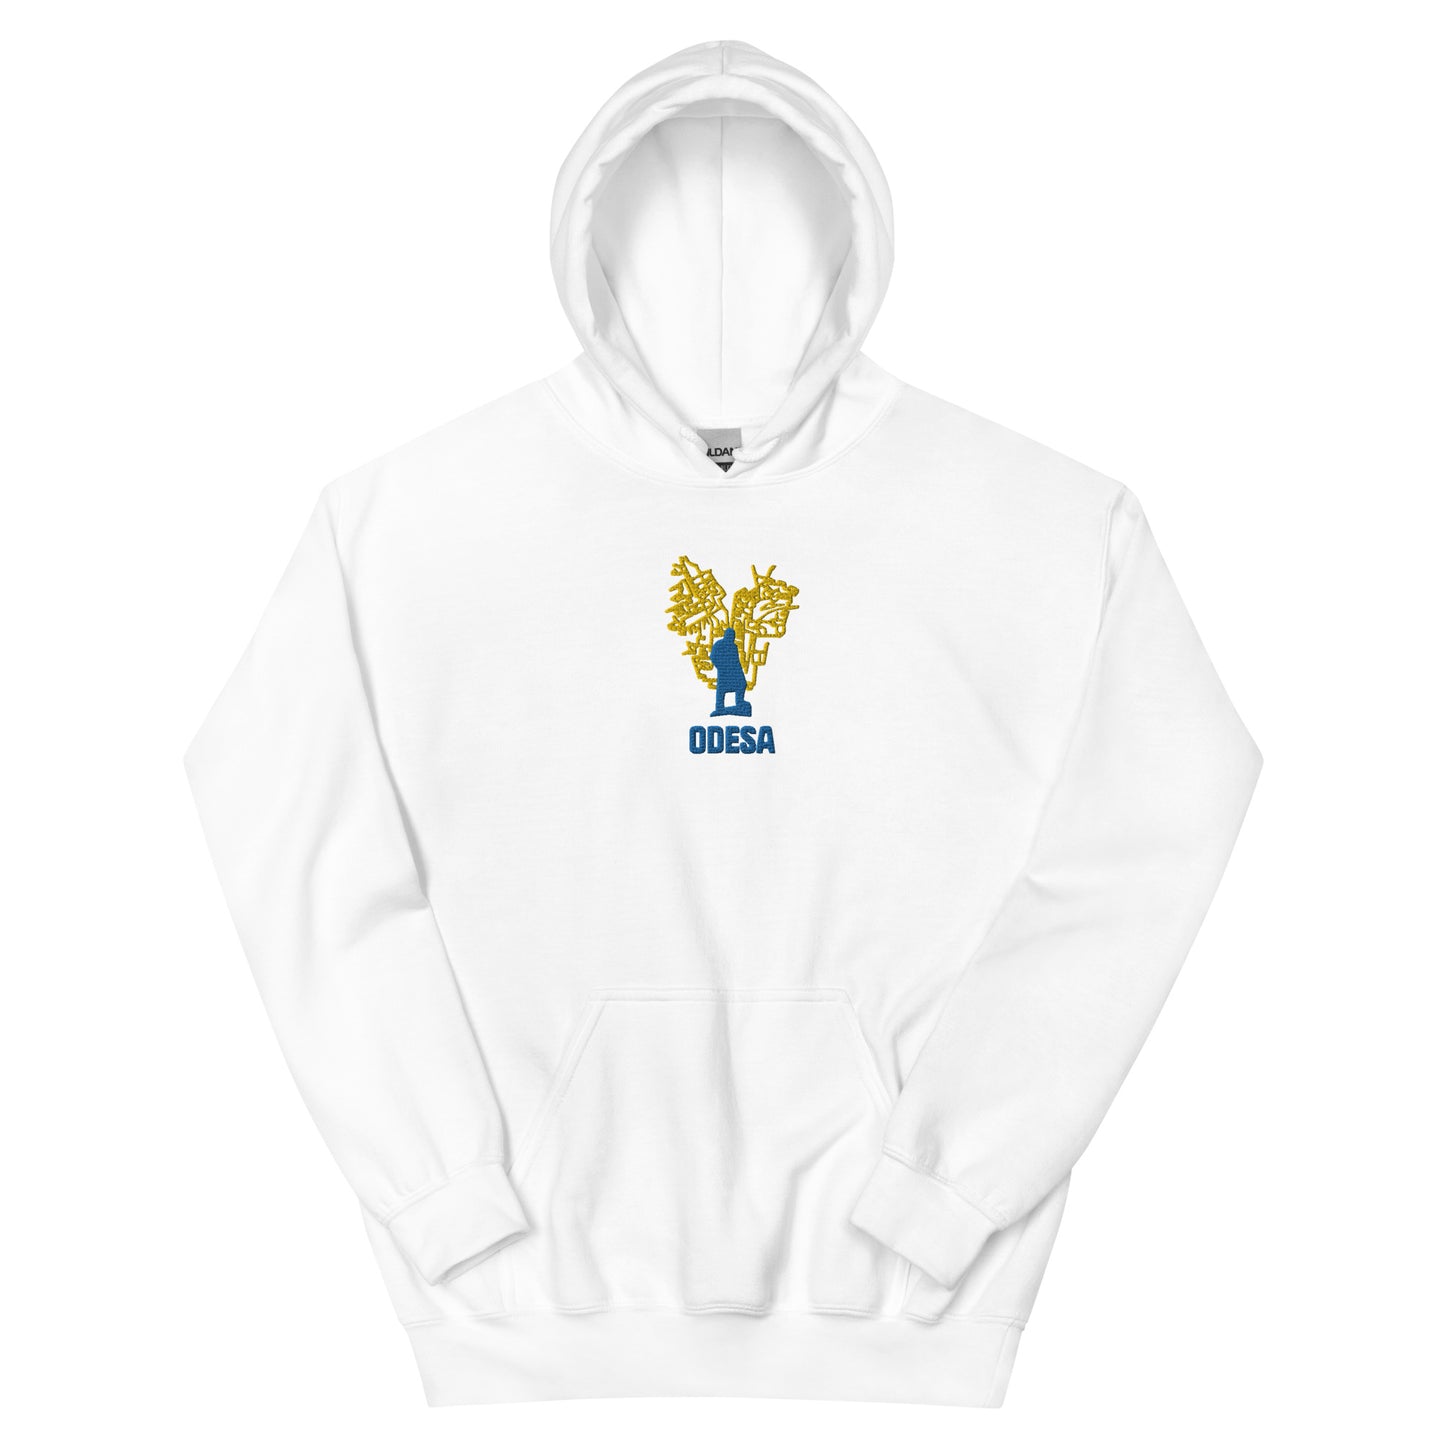 2 Years of Resistance Embroidered Hoodie Odesa